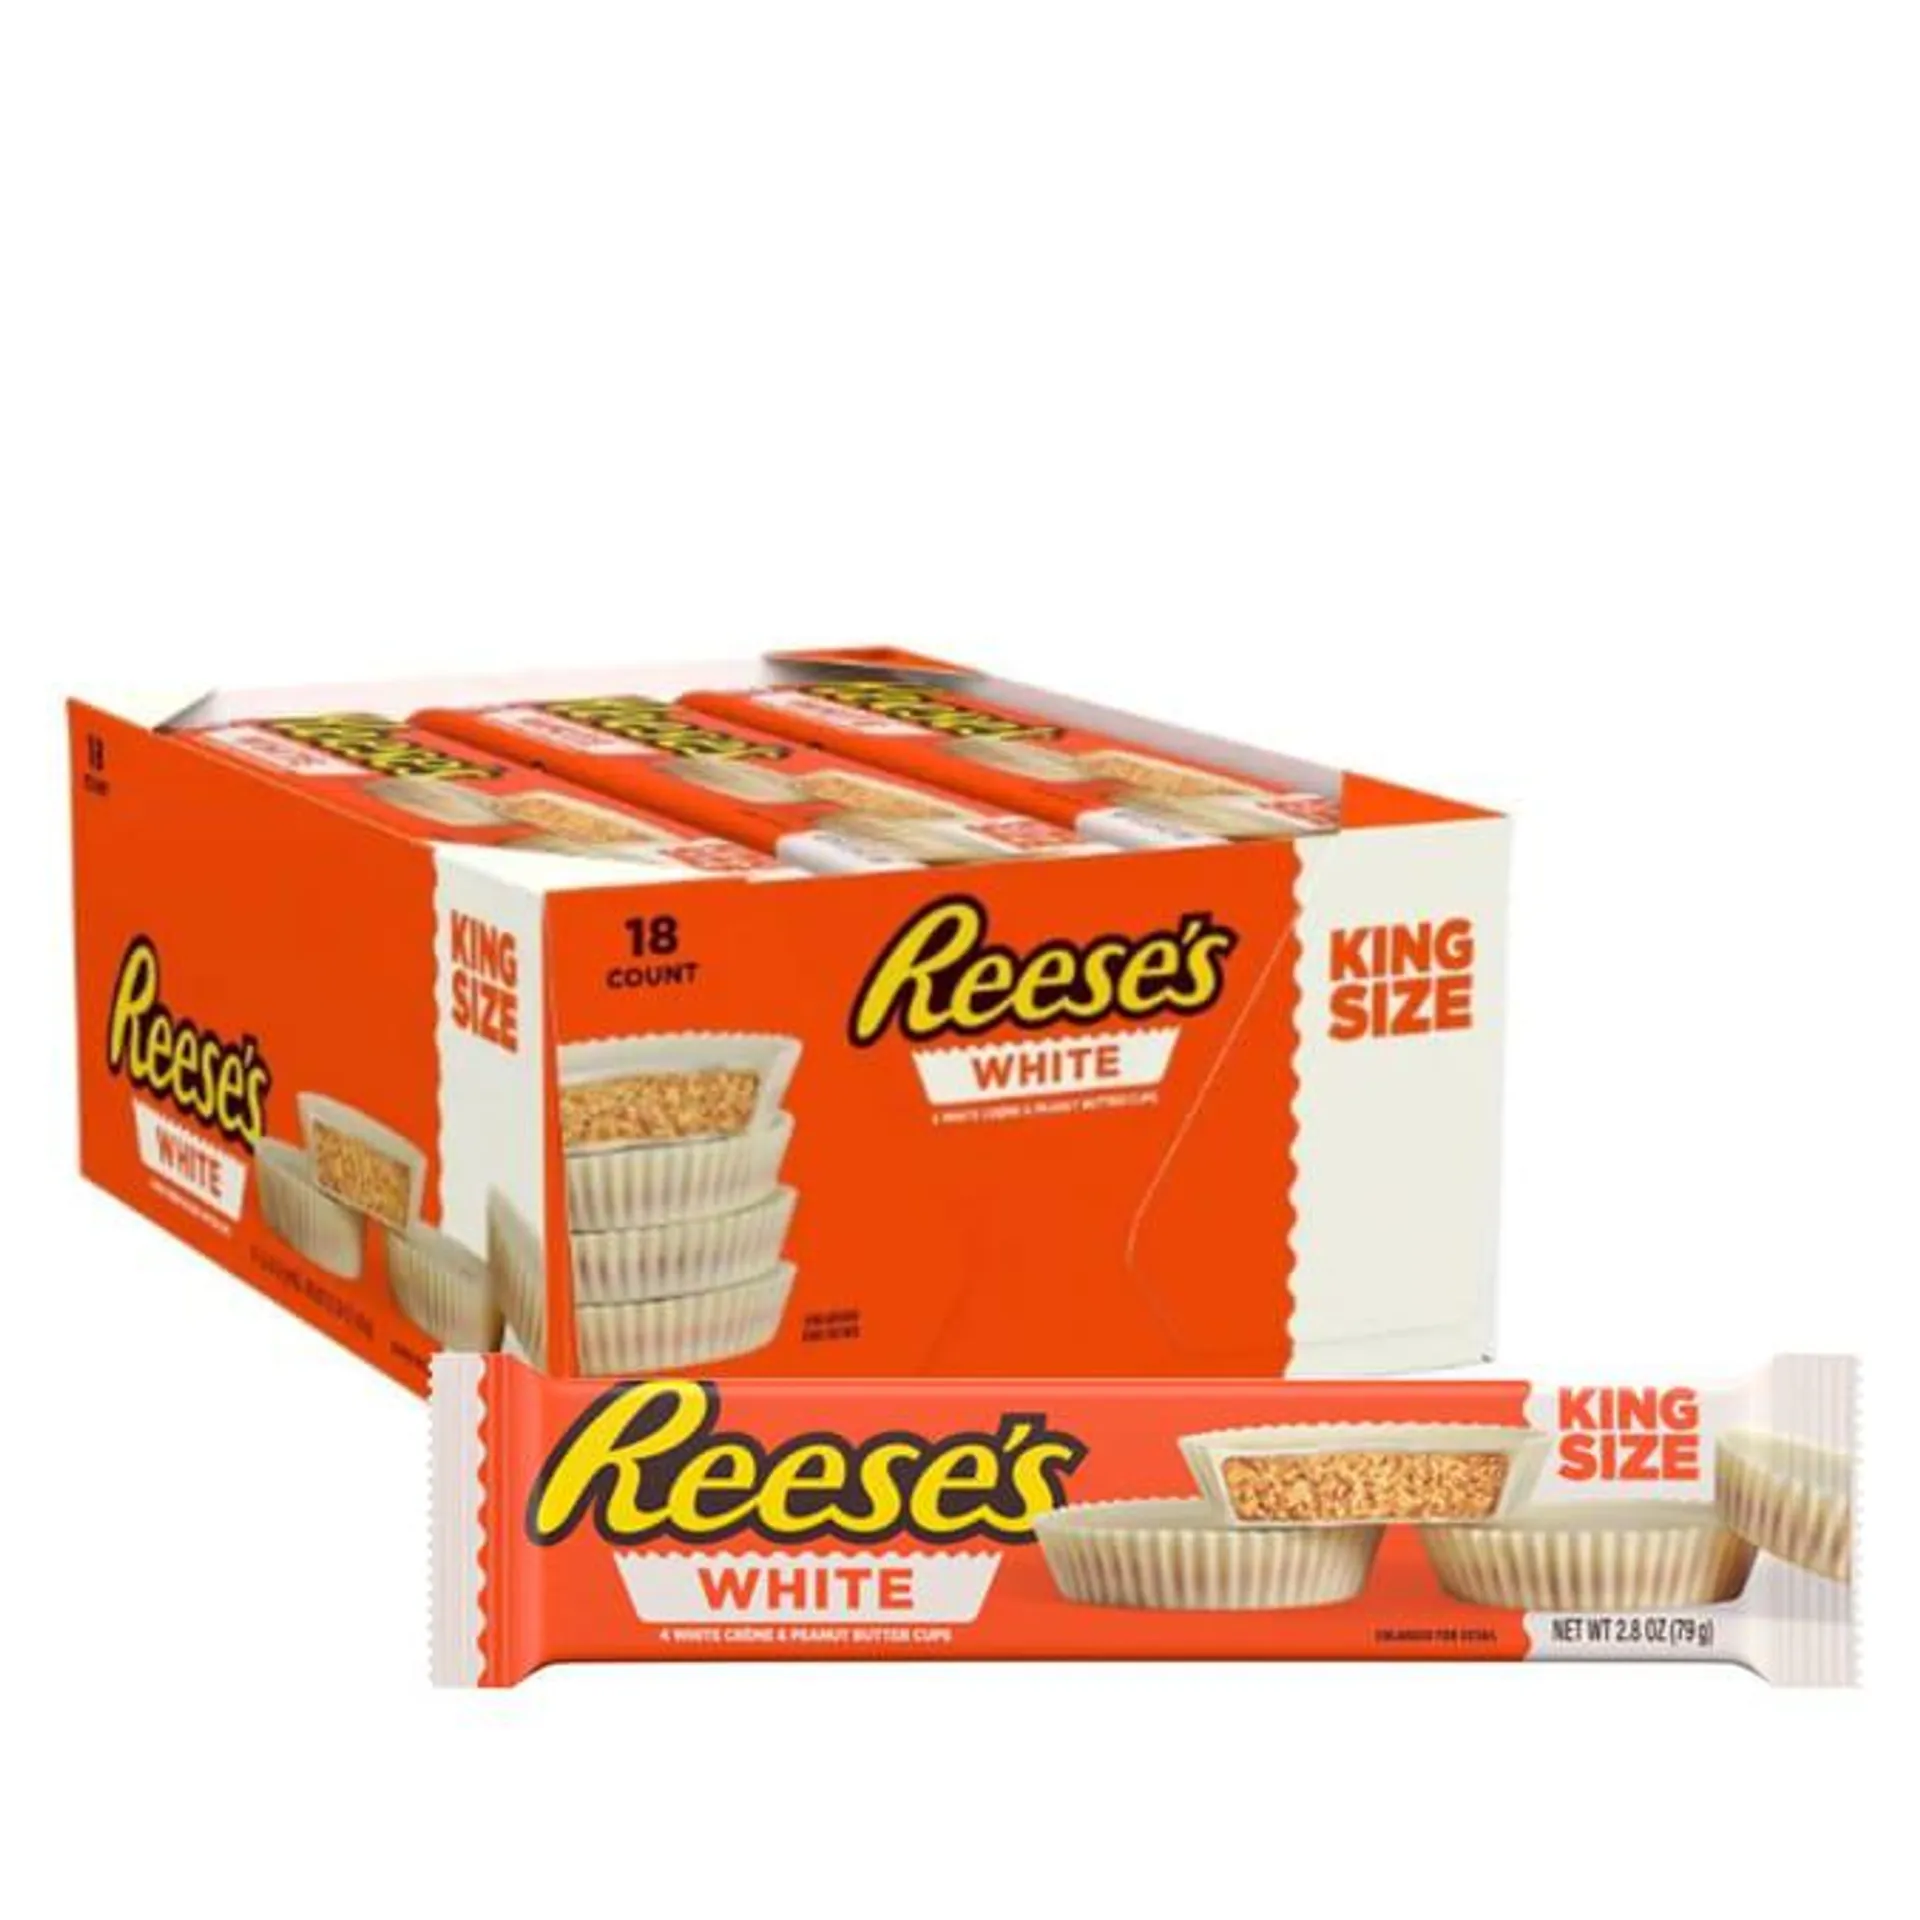 Reese's White Peanut Butter Cups King Size 79g x18